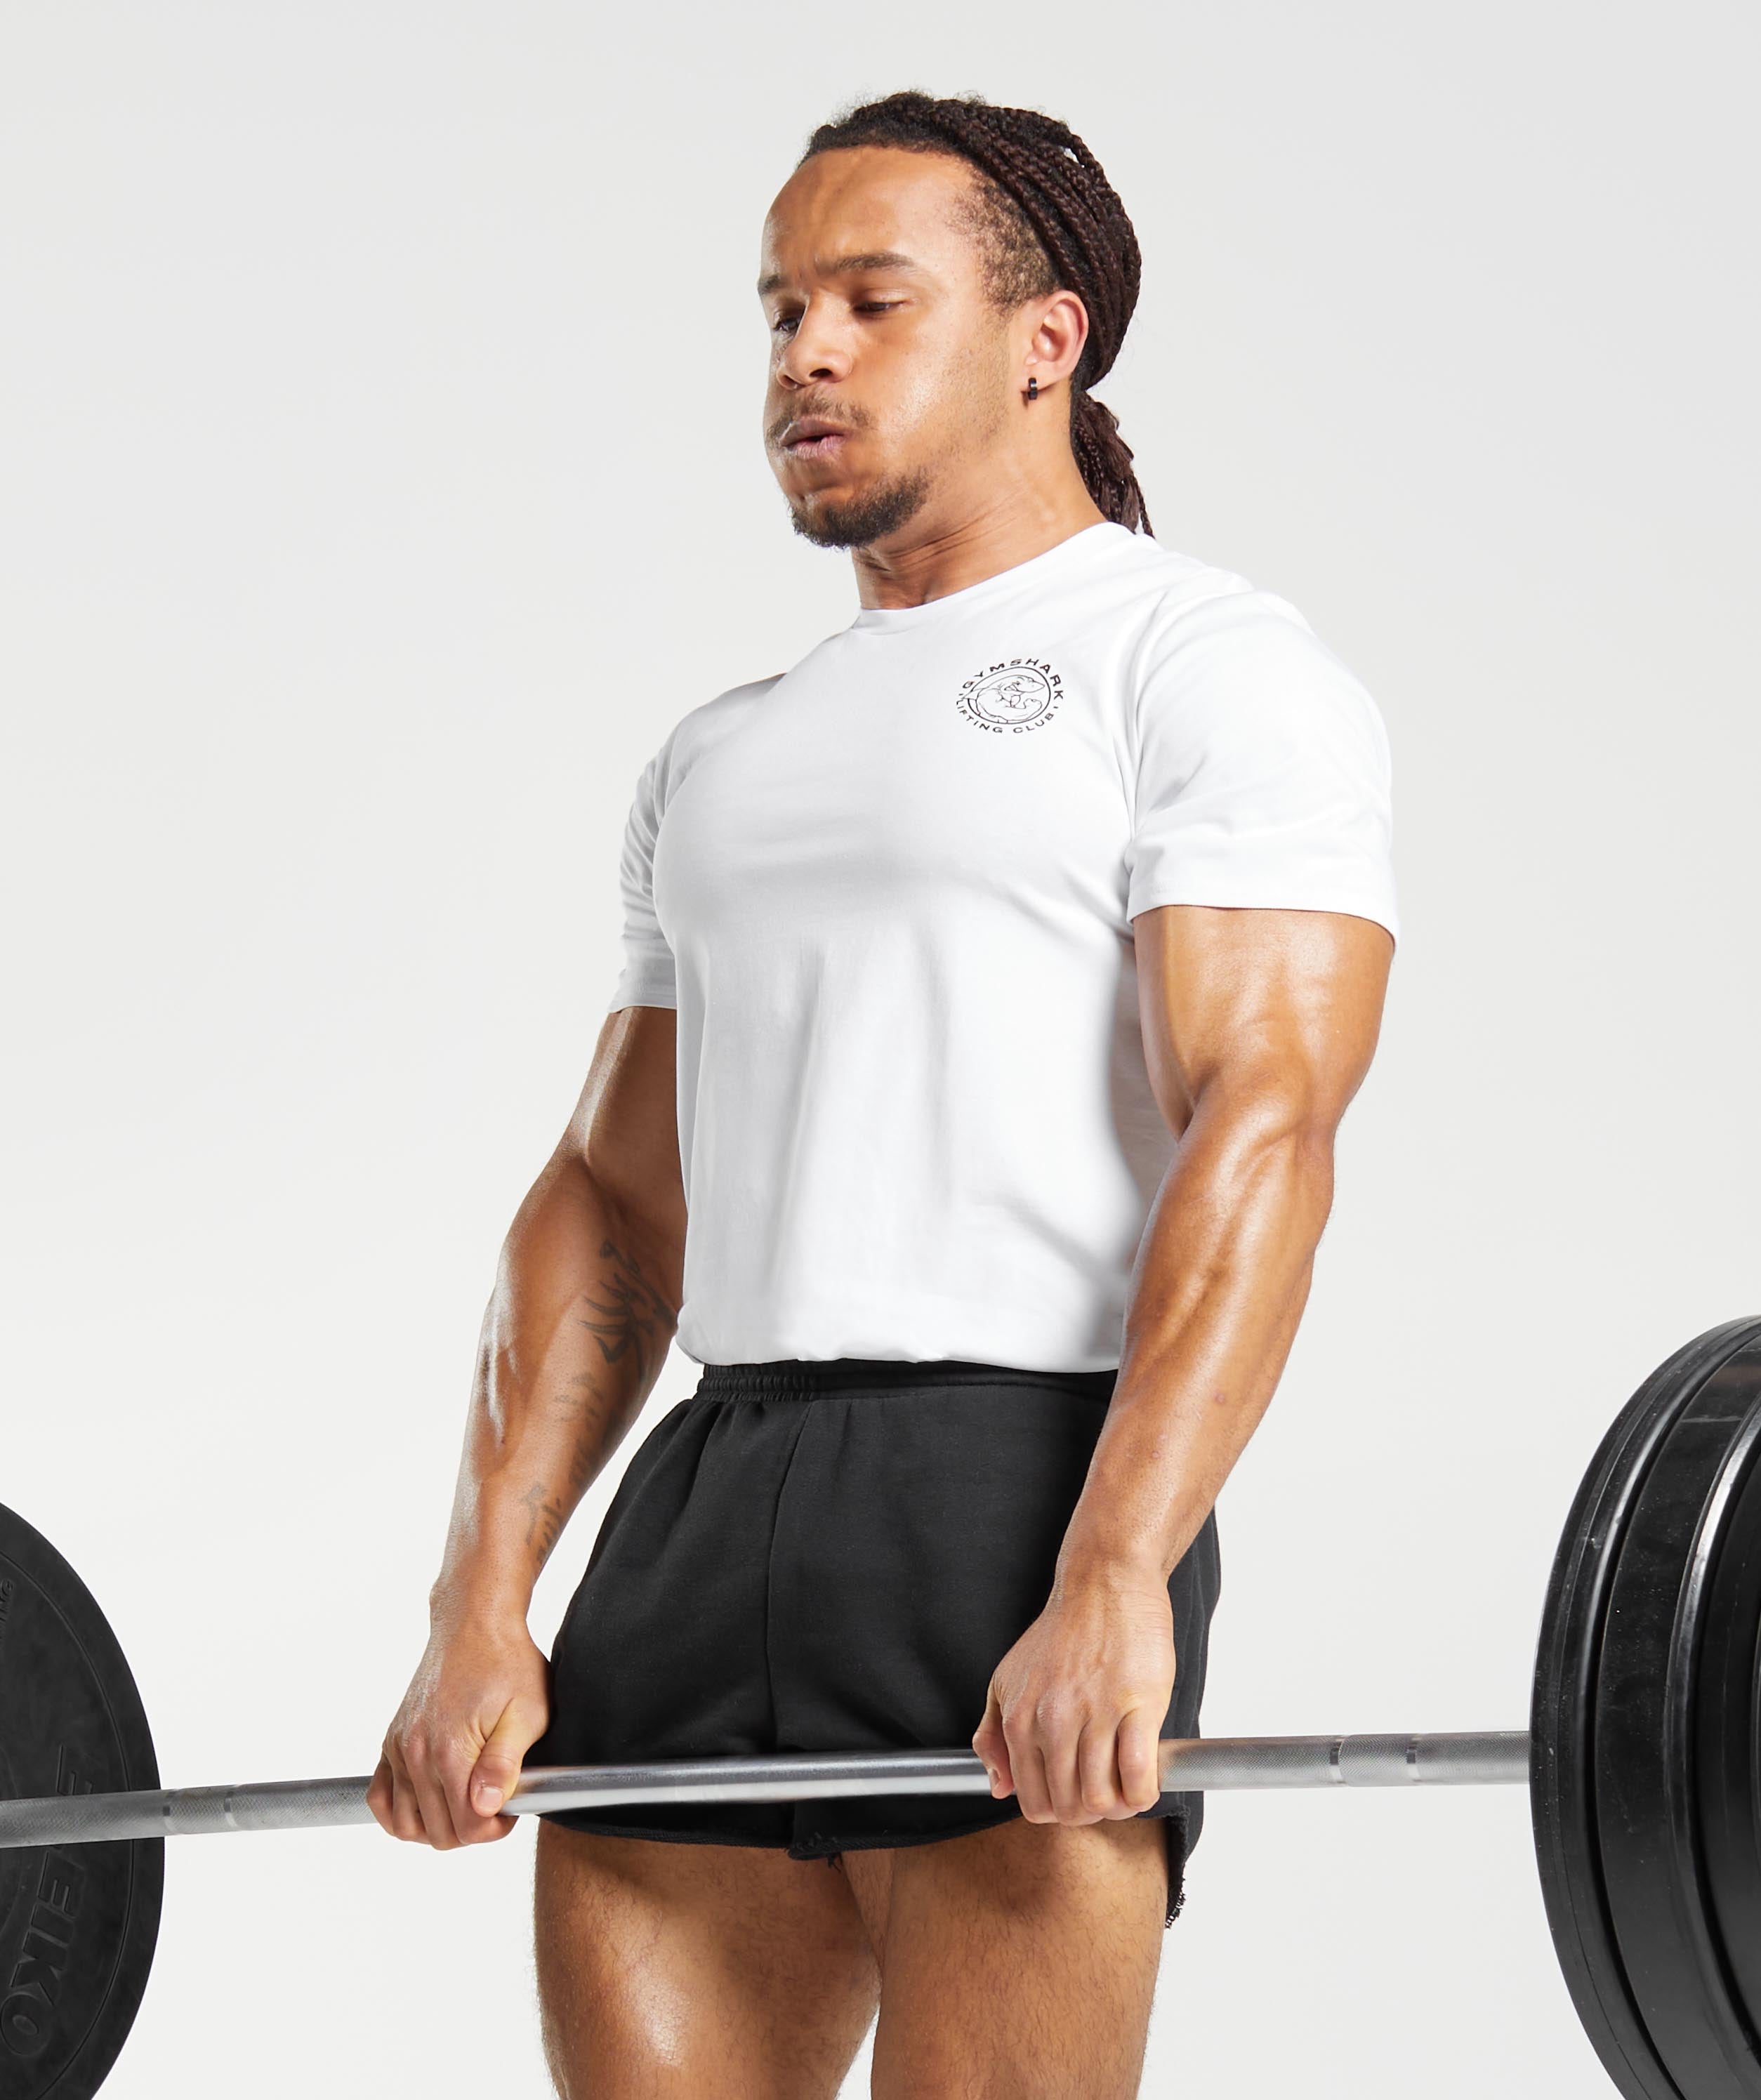 Gymshark Legacy, A New Season of Lifting Clothes